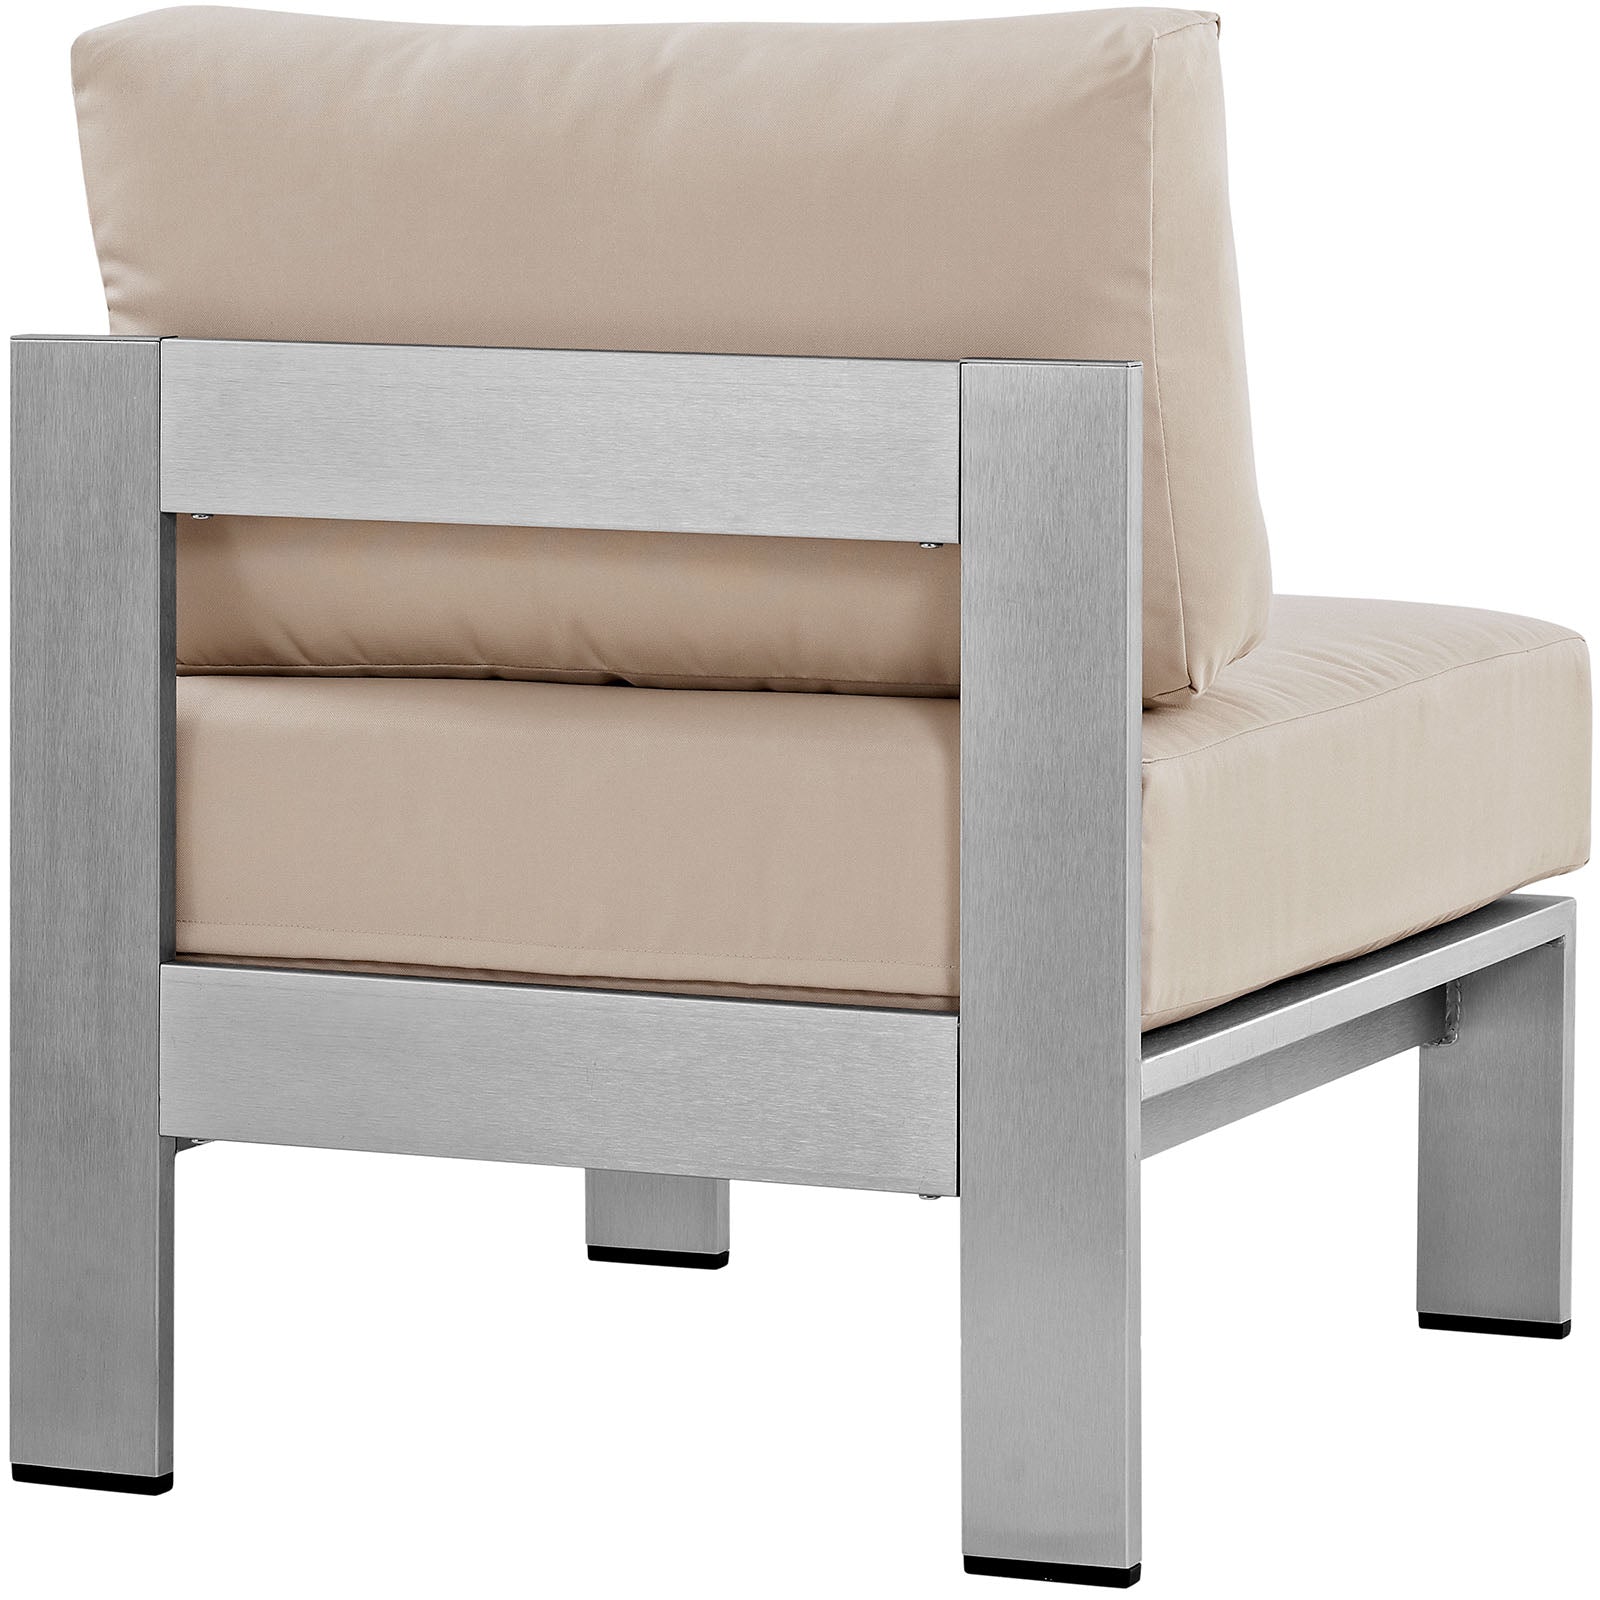 Modway Outdoor Chairs - Shore Armless Outdoor Patio Aluminum Chair Silver Beige